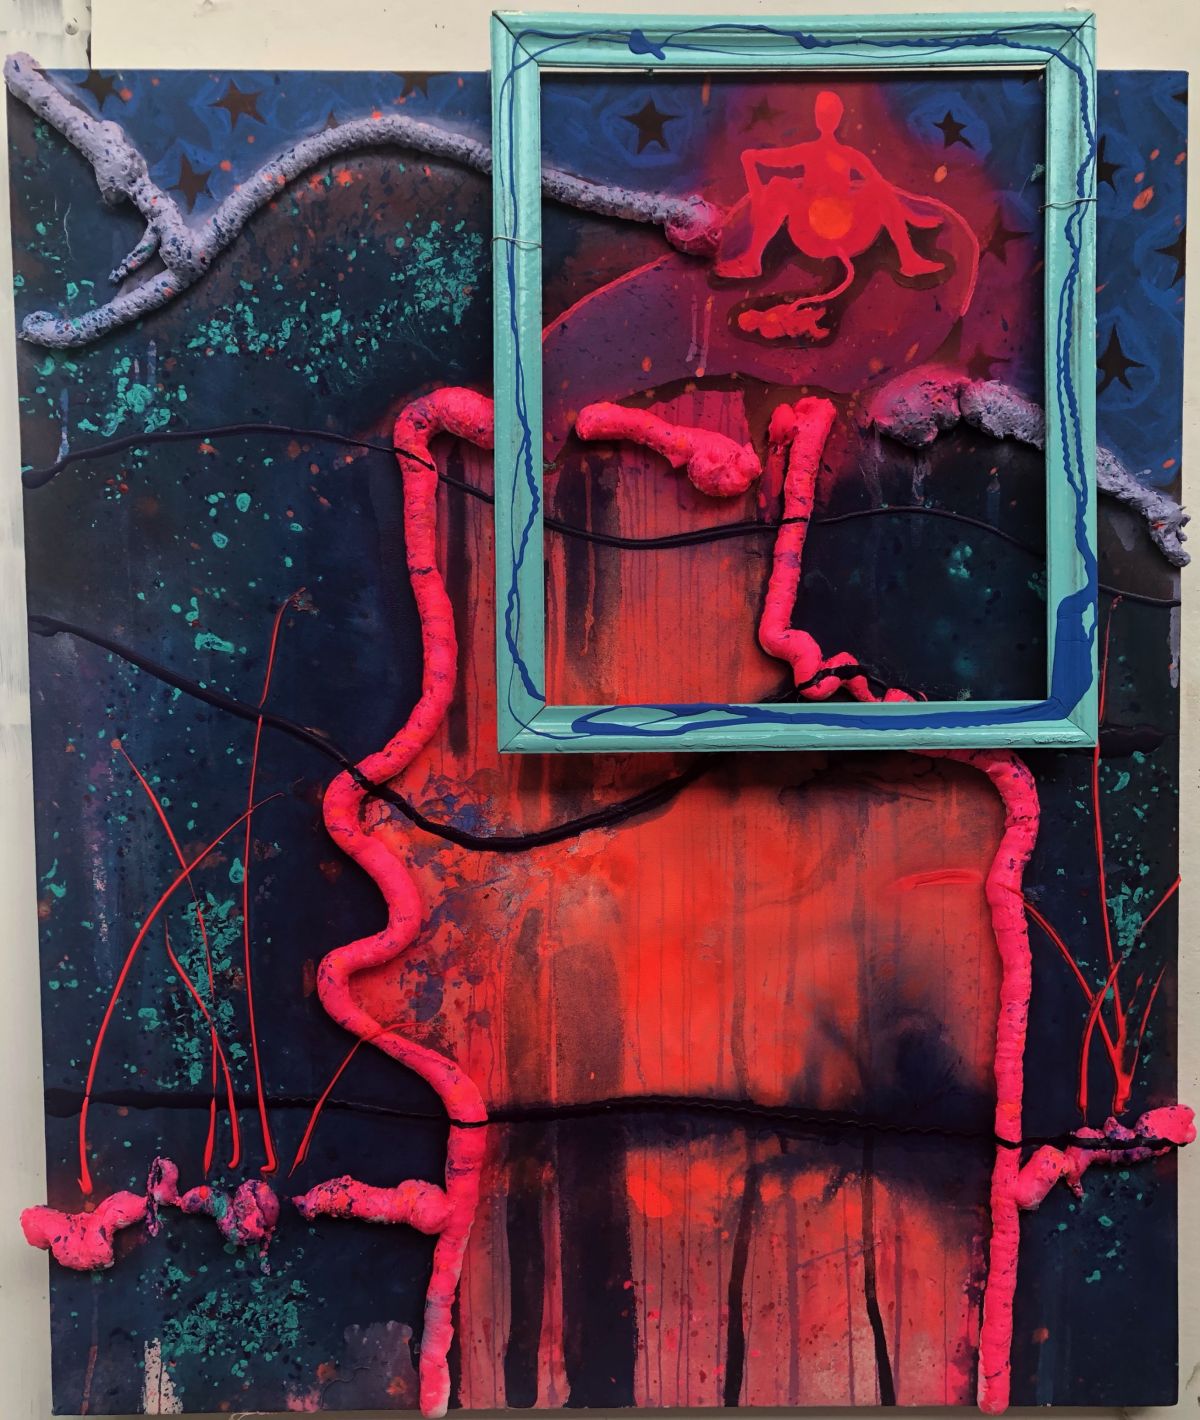 Stephanie Alifano, Framed Birth in Neon, Acrylic paint, spray paint, gap filler foam, picture fra...